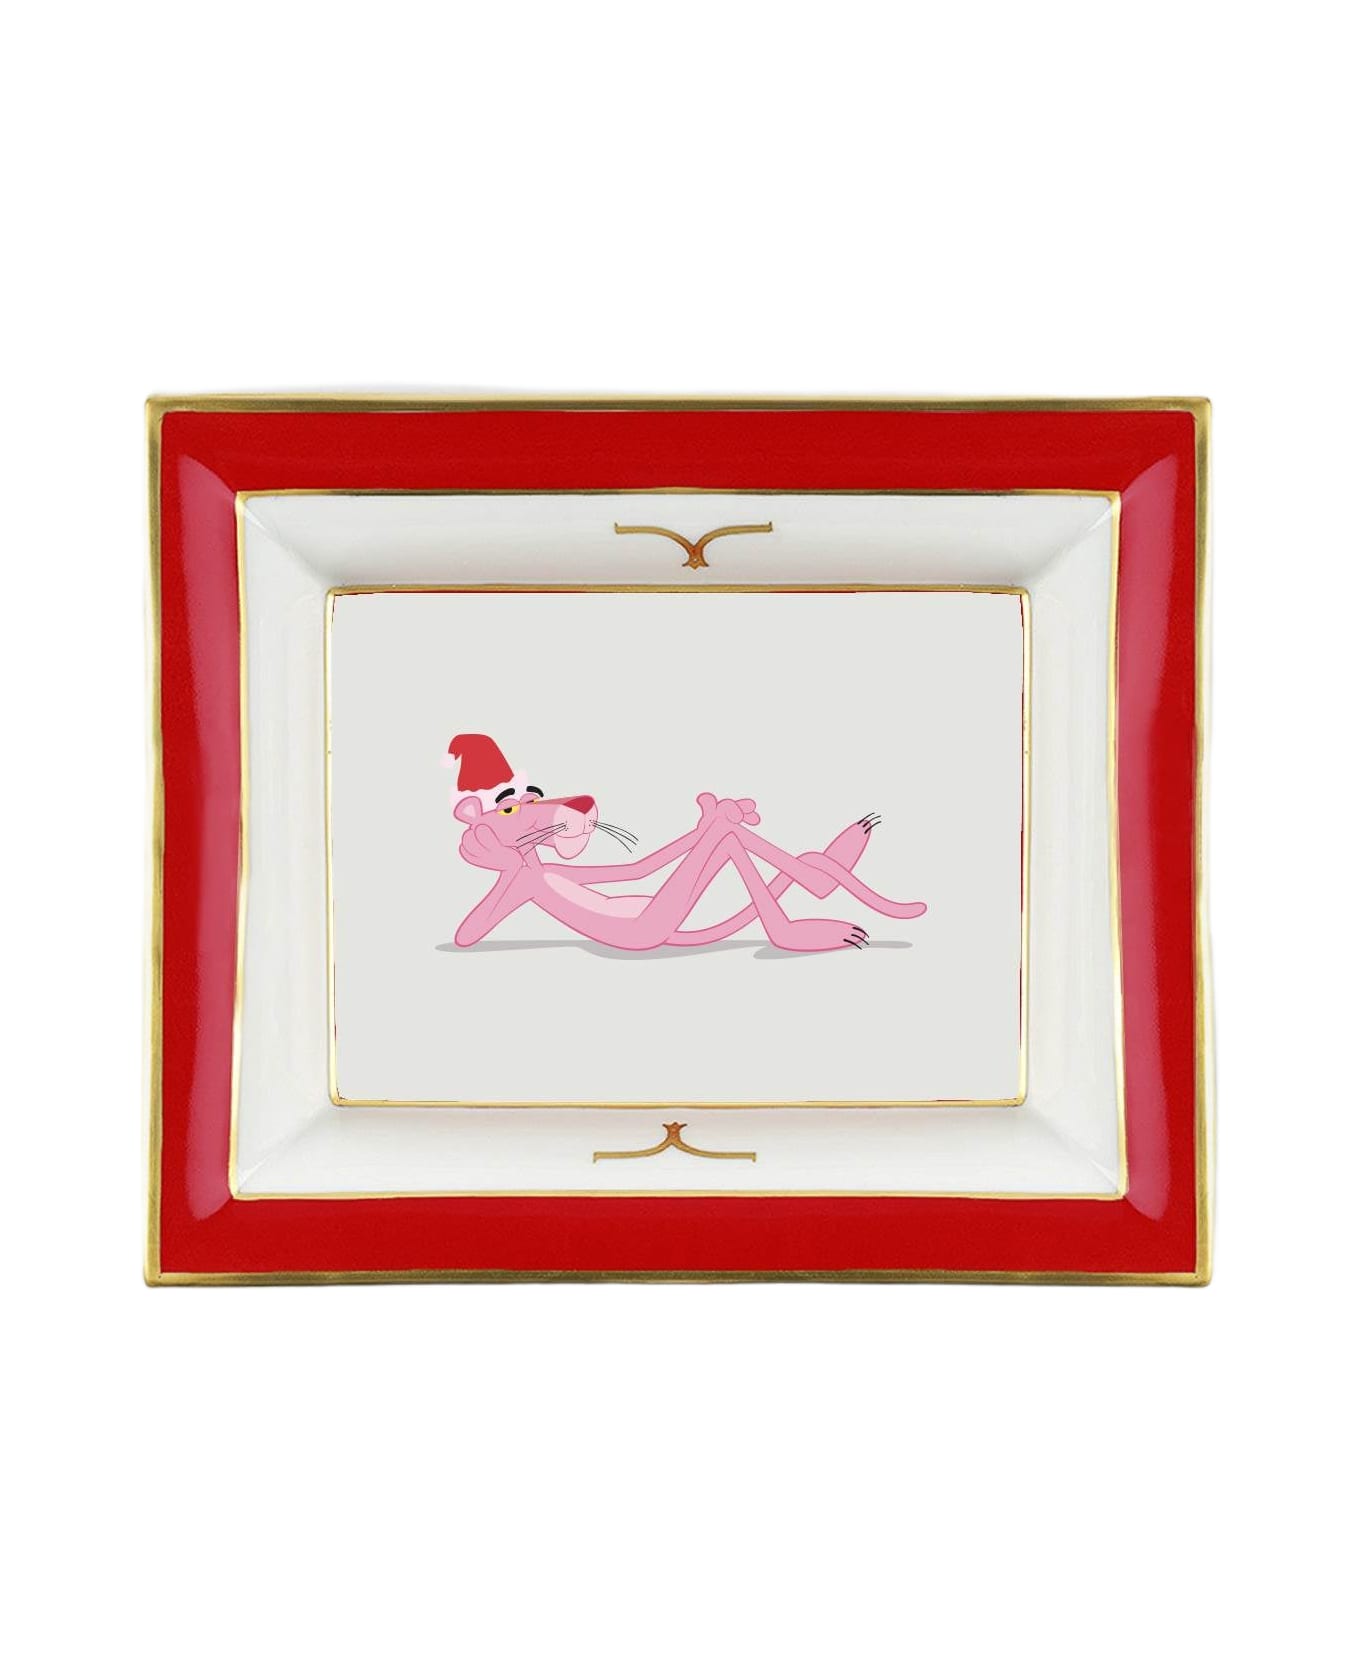 Larusmiani Pocket Emptier Pink Panther Christmas Tray - Red